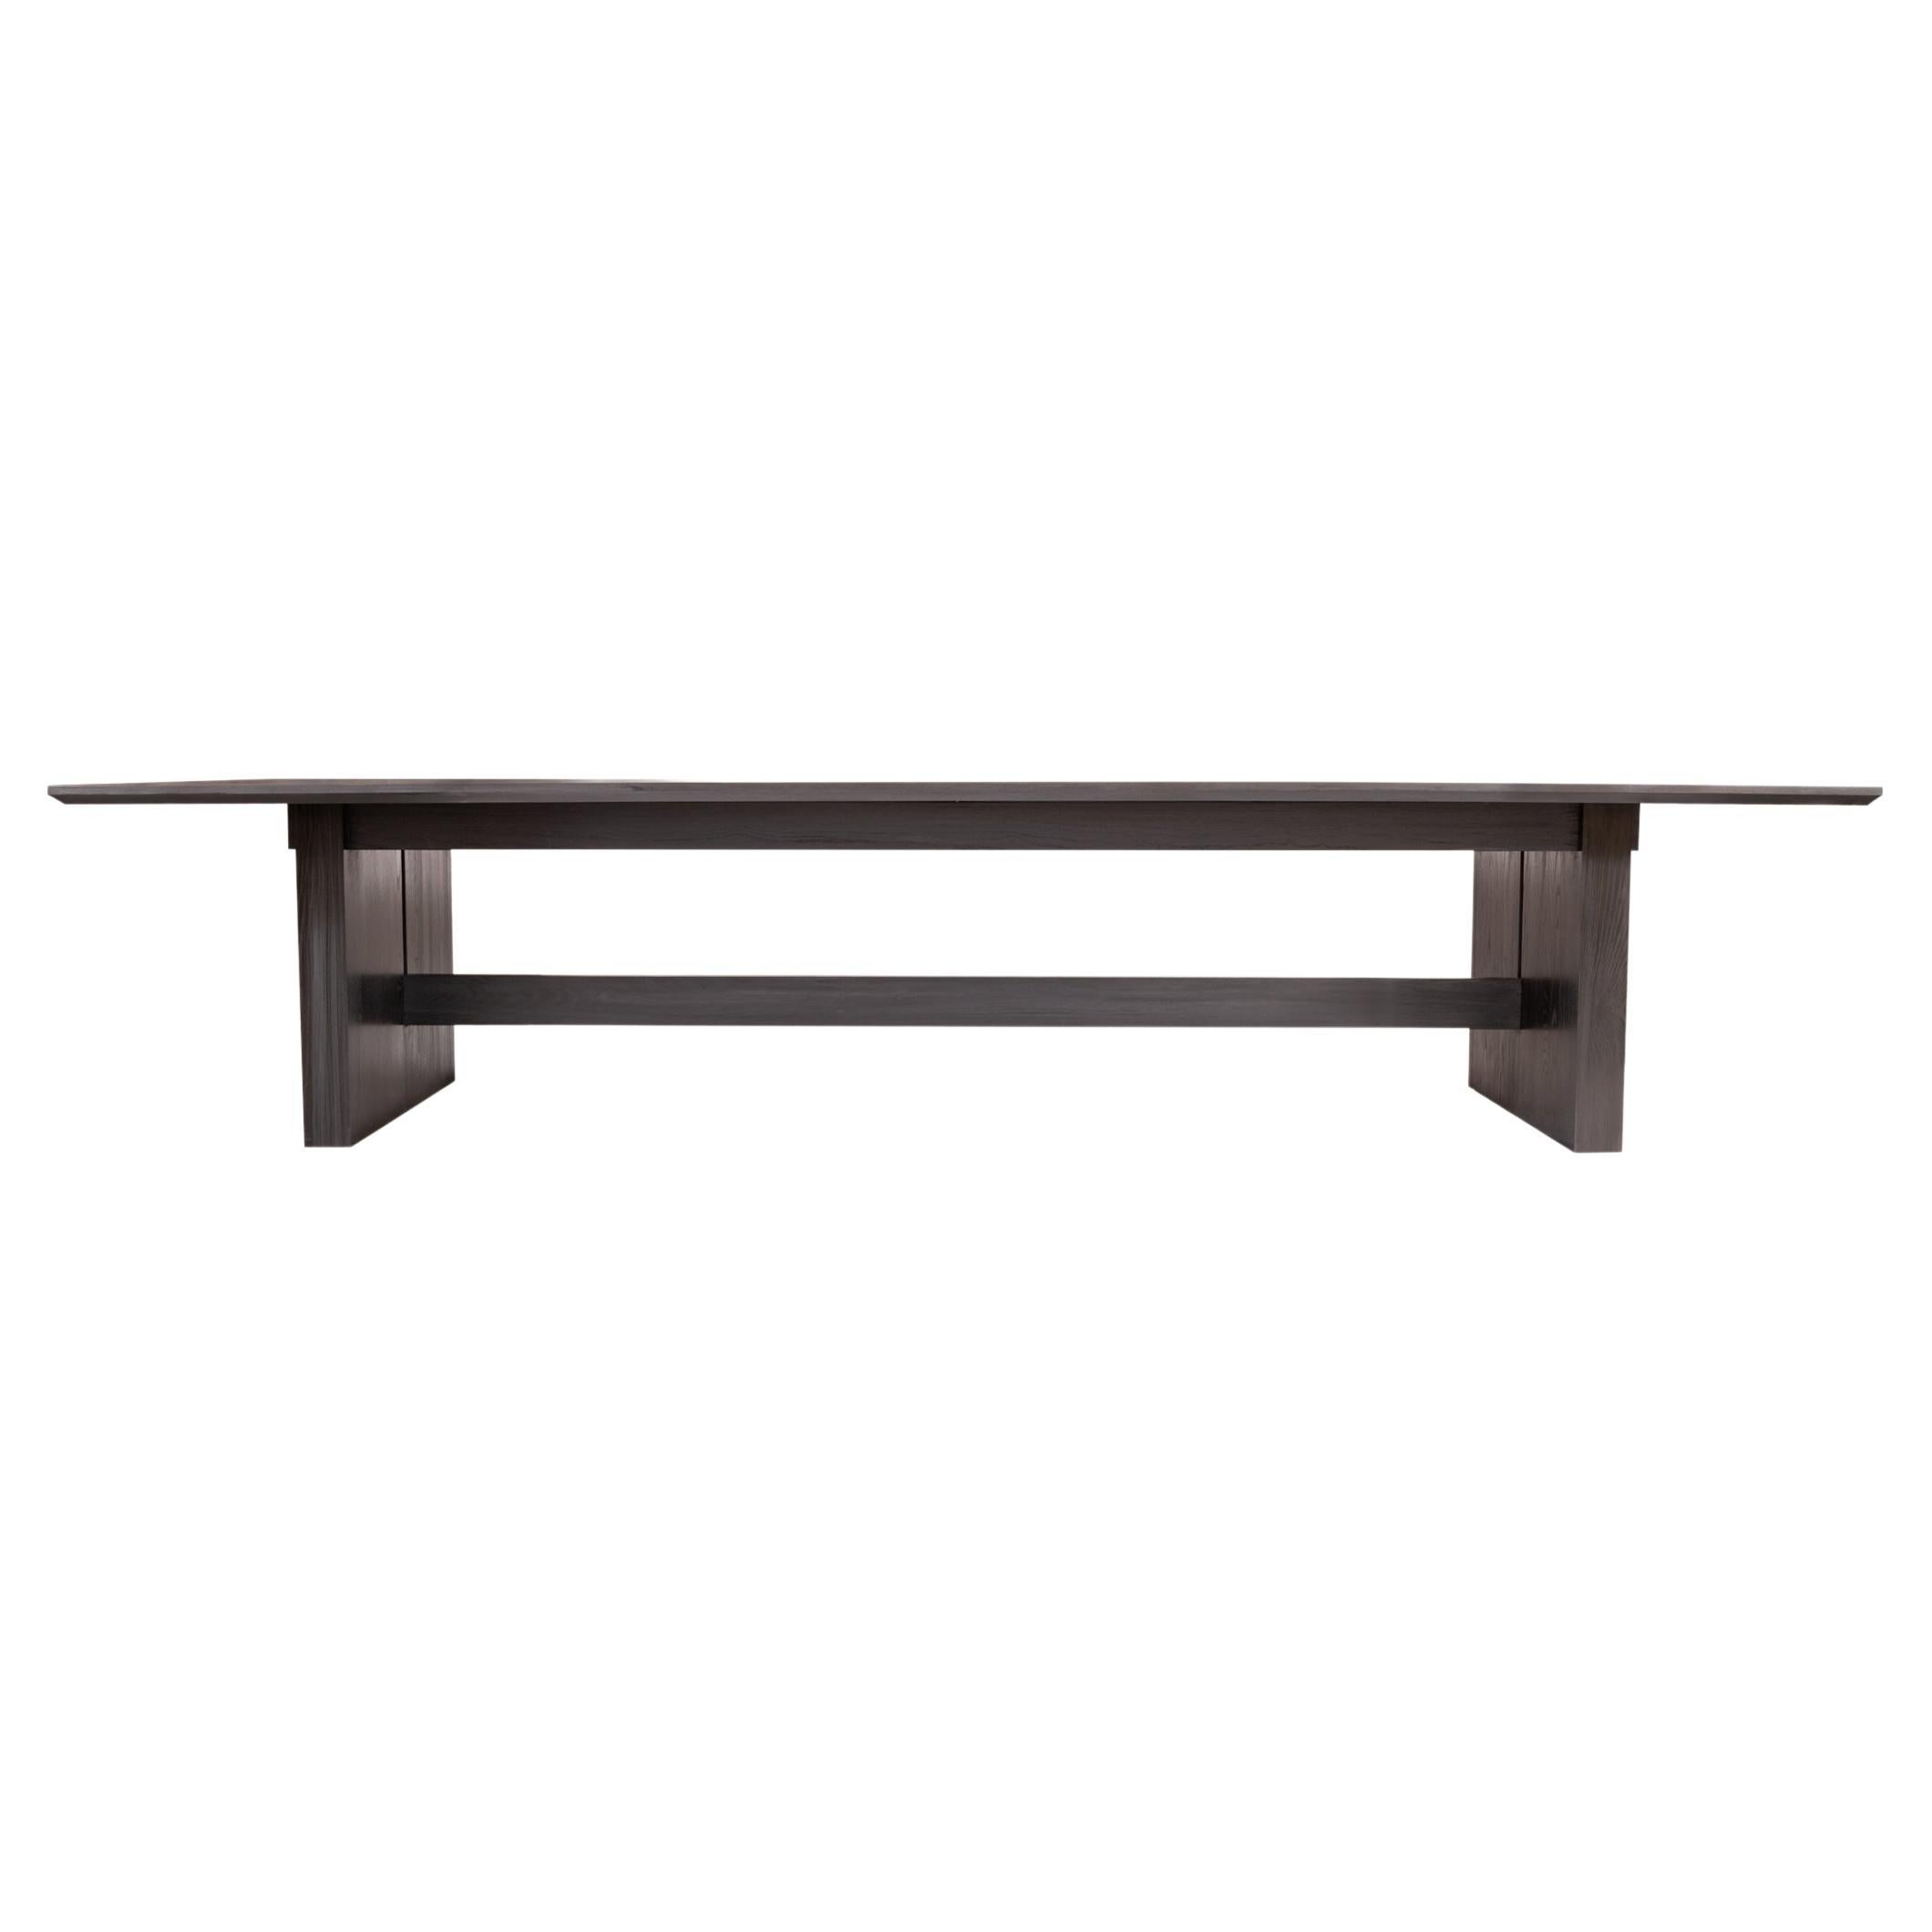 Magnolia Conference Table in Blackened Ash with Chamfered Knife Edge For Sale